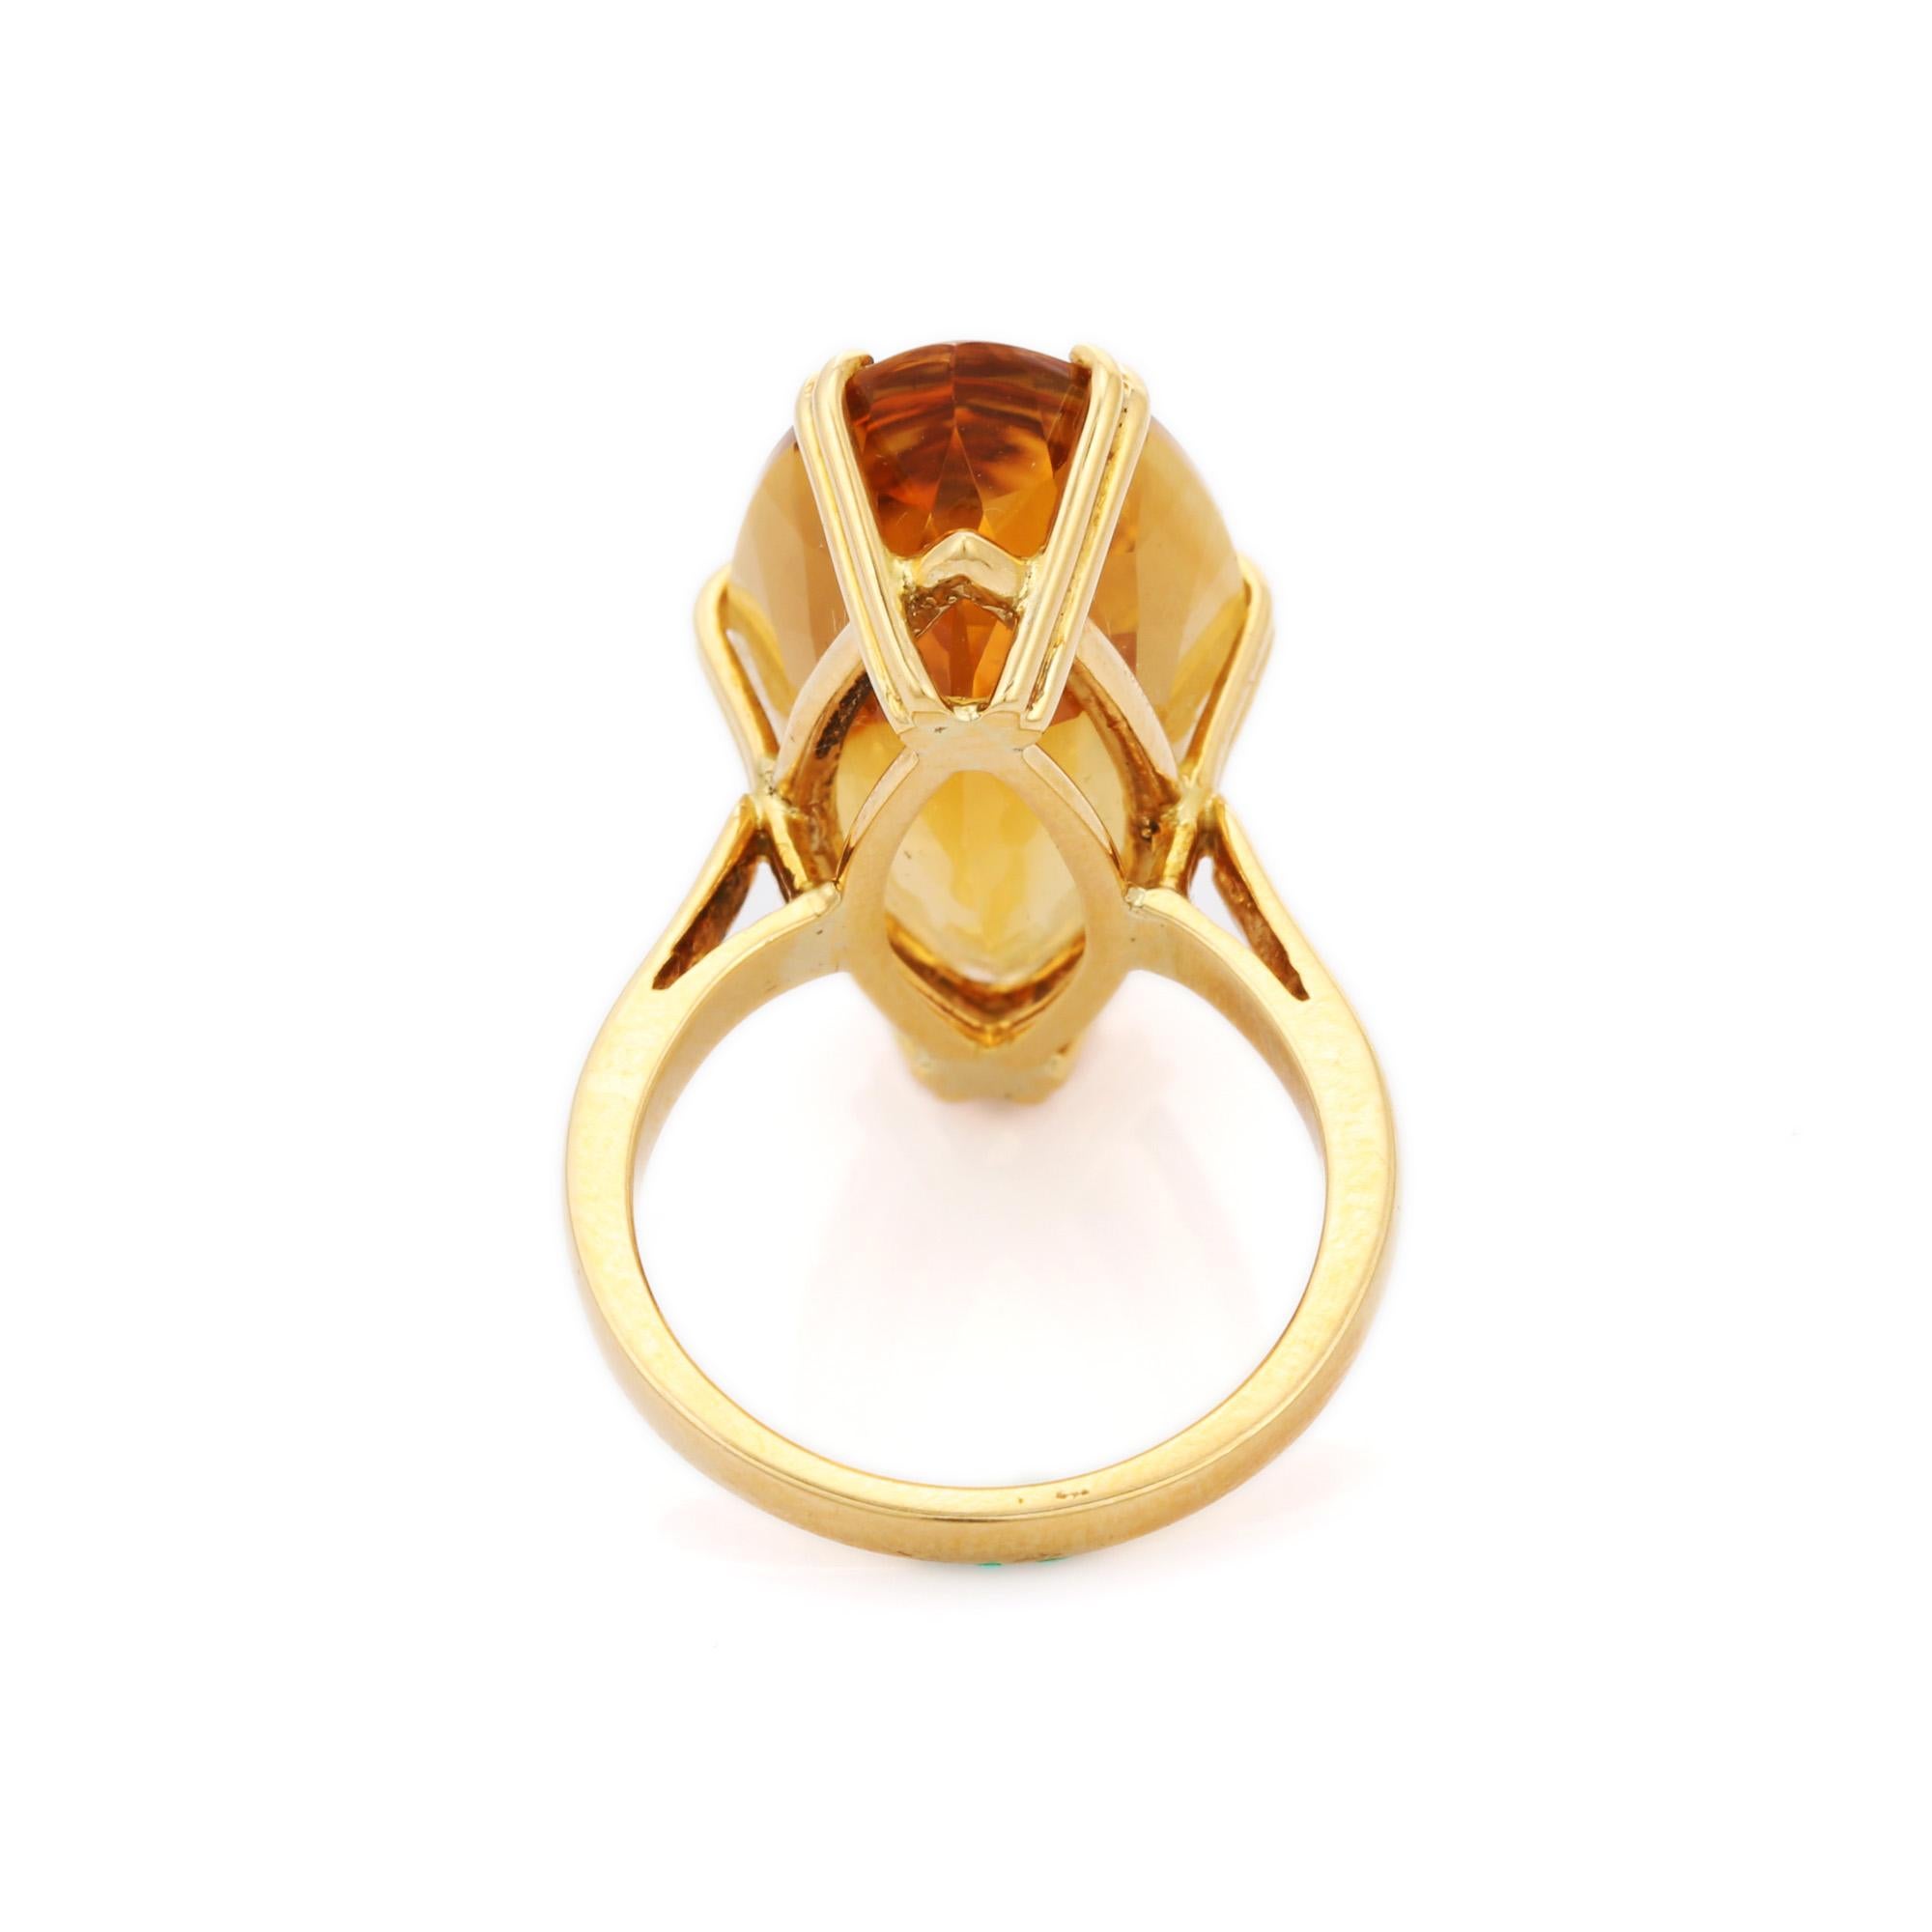 For Sale:  24 Carat Natural Long Marquise Citrine Cocktail Ring in 18 Karat Yellow Gold 4